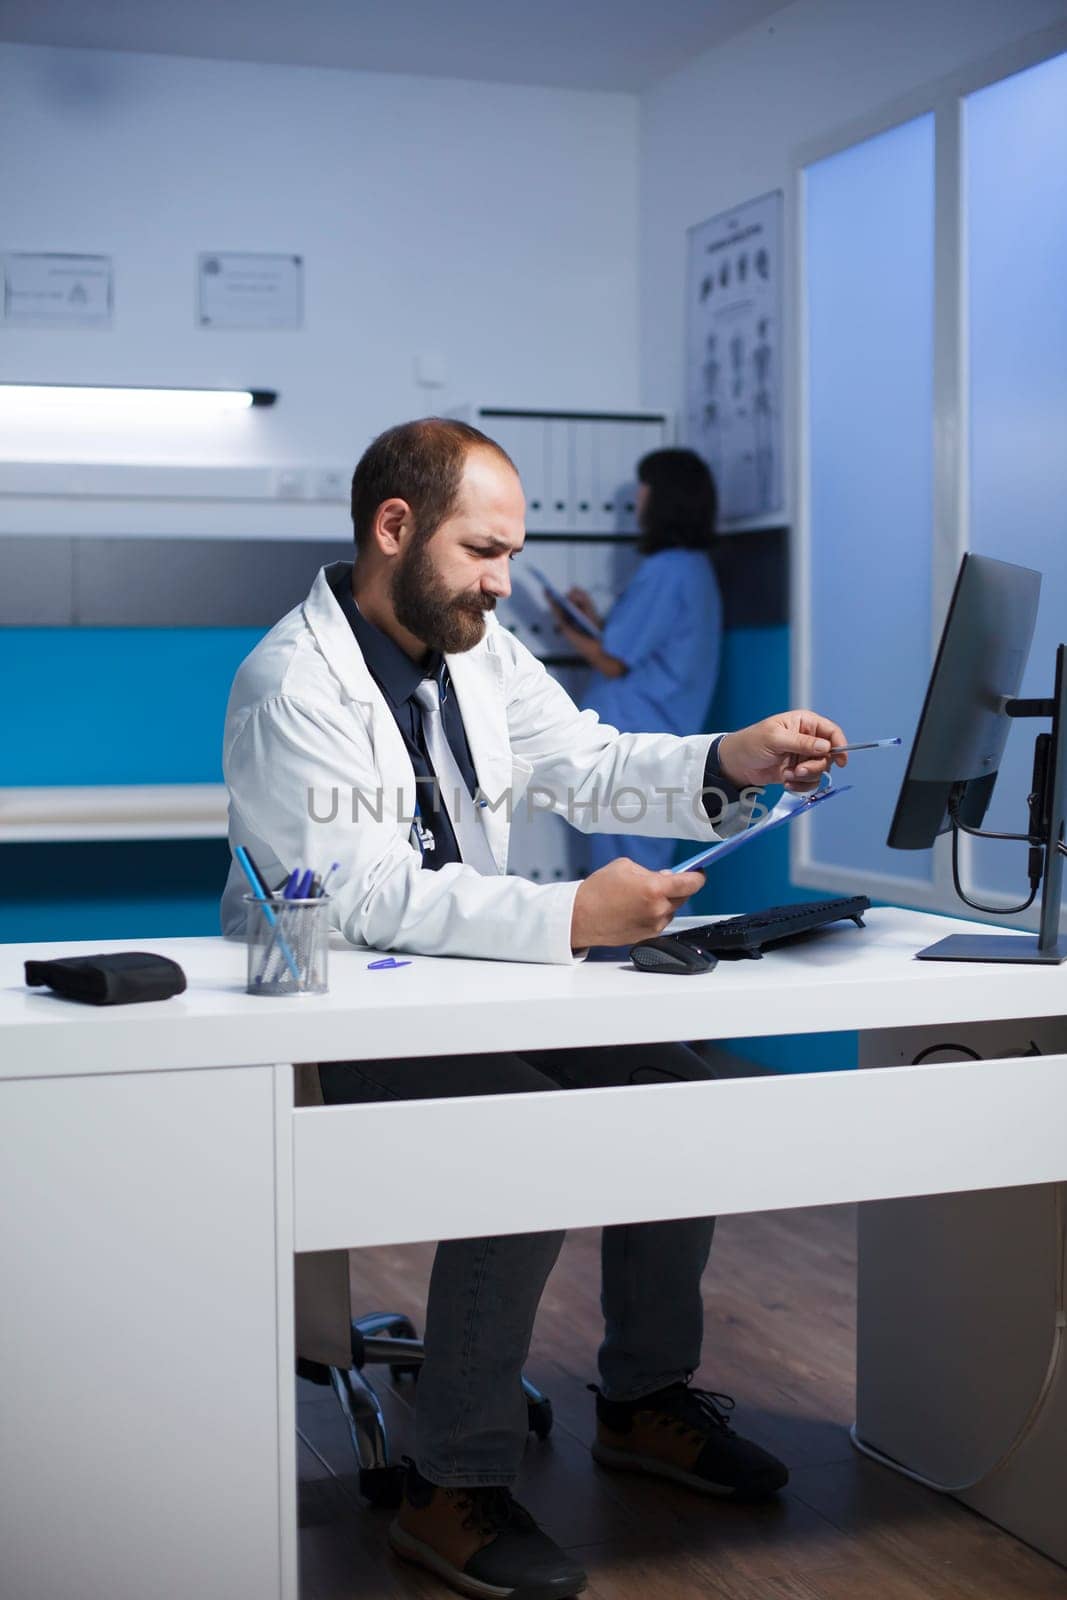 Detailed image of male doctor at the clinic desk going over and analyzing his notes. Caucasian man utilizing desktop computer and clipboard as he prepares for patient medical consultations.